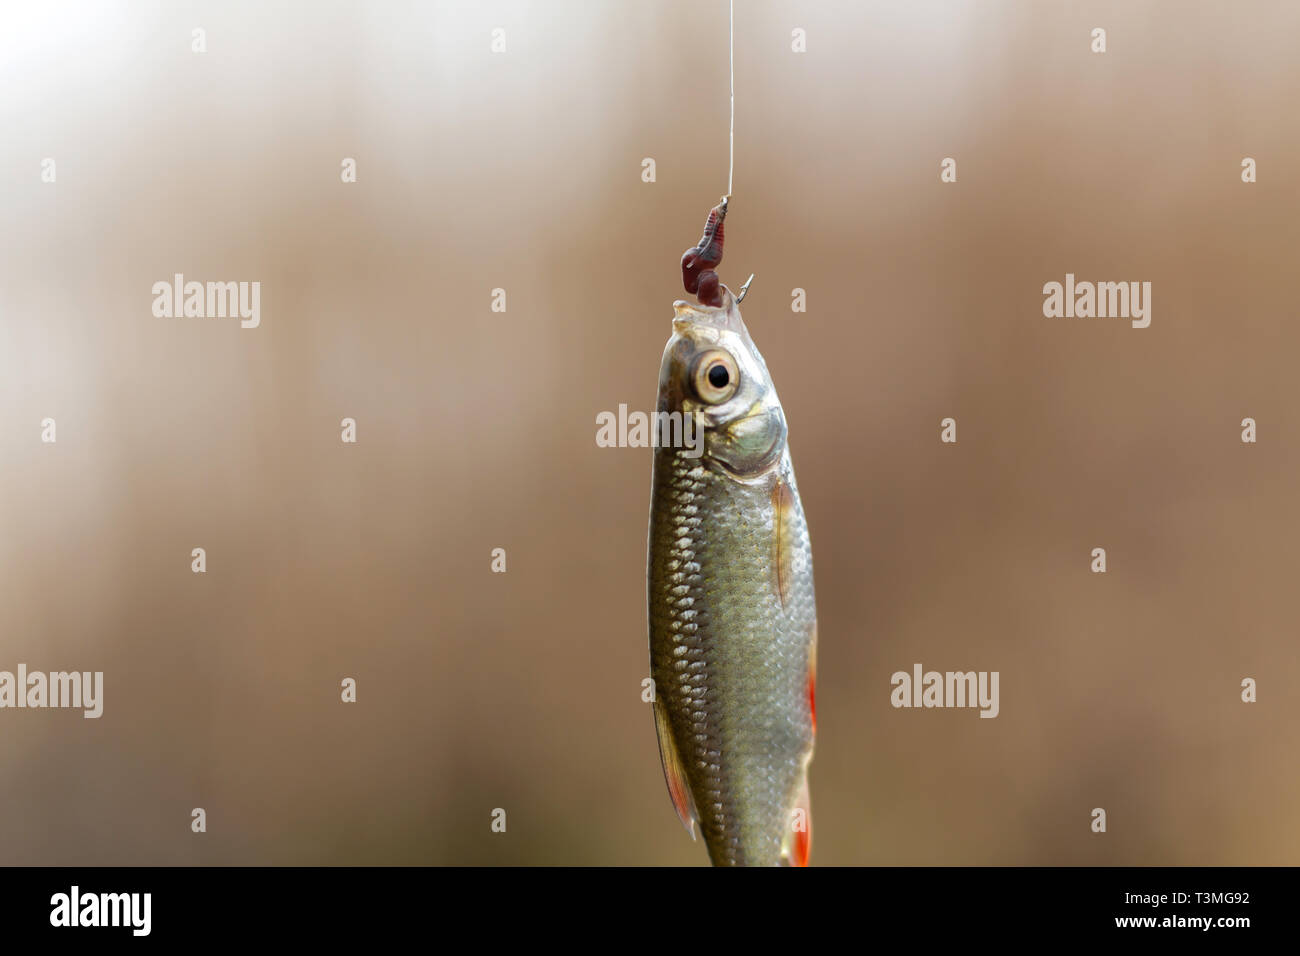 fisherman caught a small fish on the hook with a worm Stock Photo - Alamy